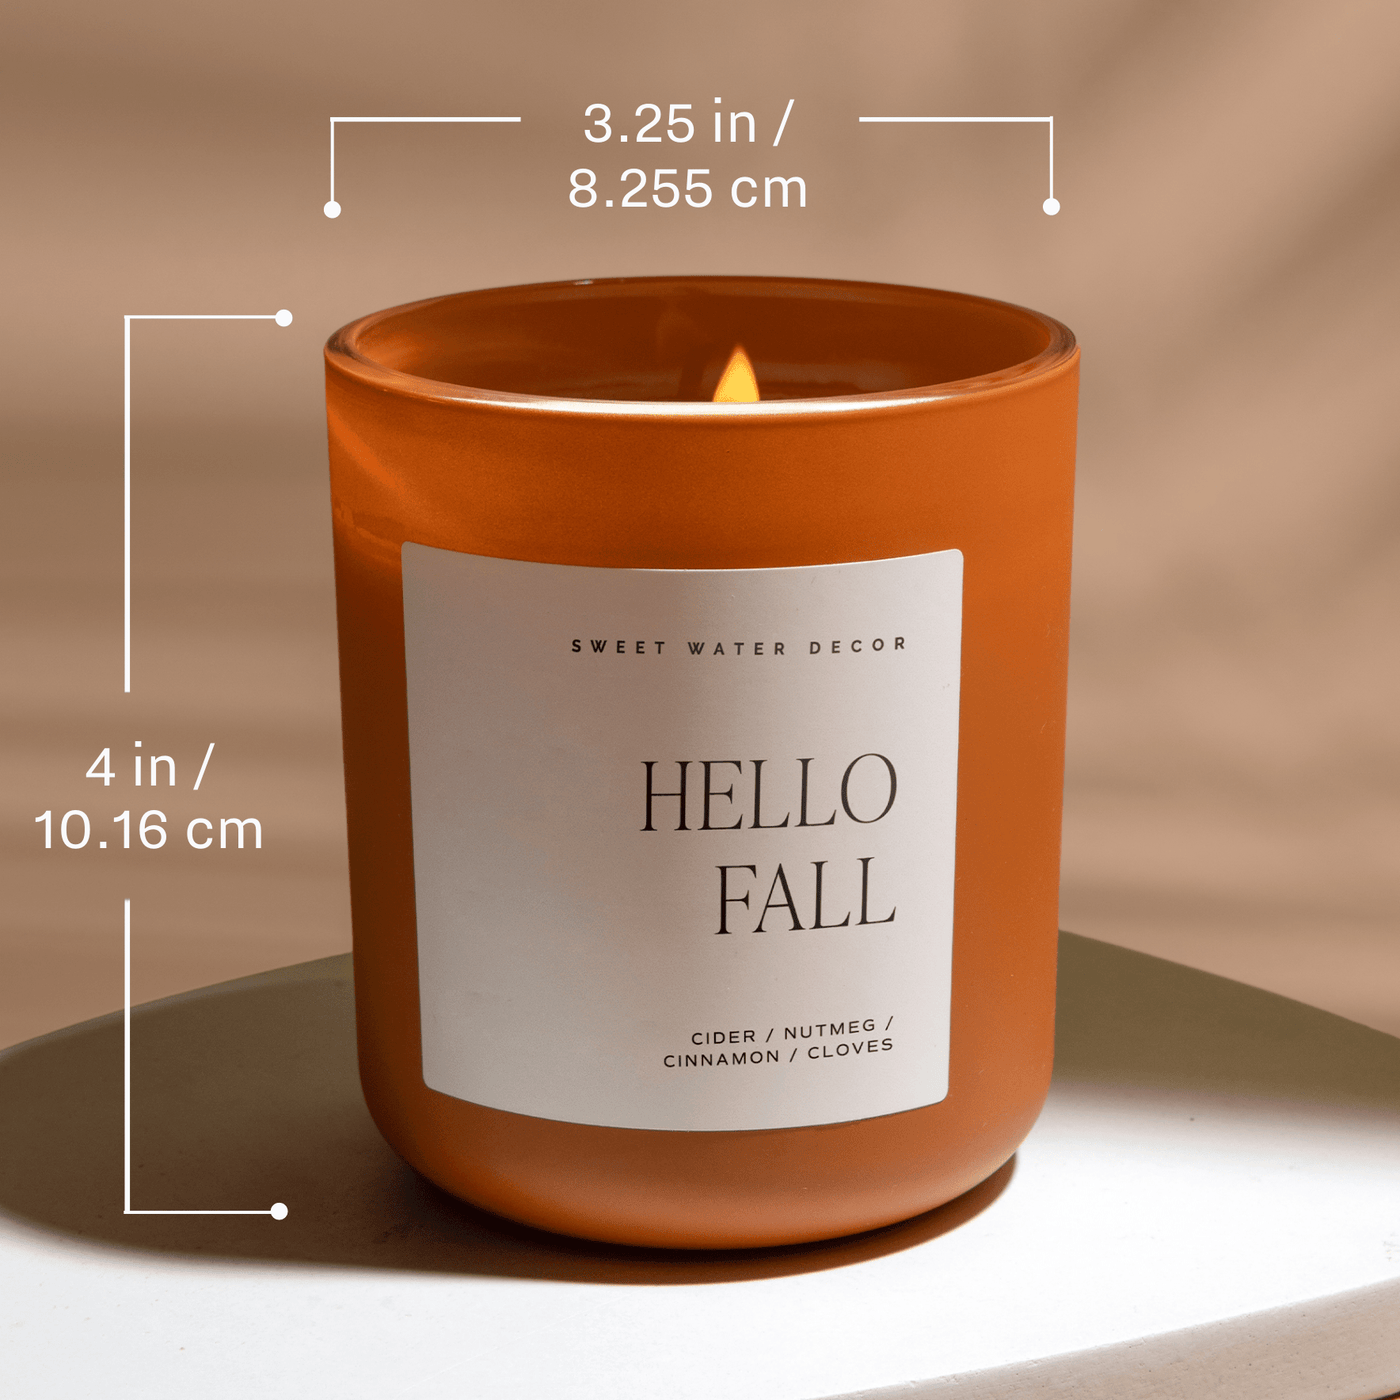 Fall Leaves Soy Candle - Orange Matte Jar - 15 oz - Sweet Water Decor - Candles